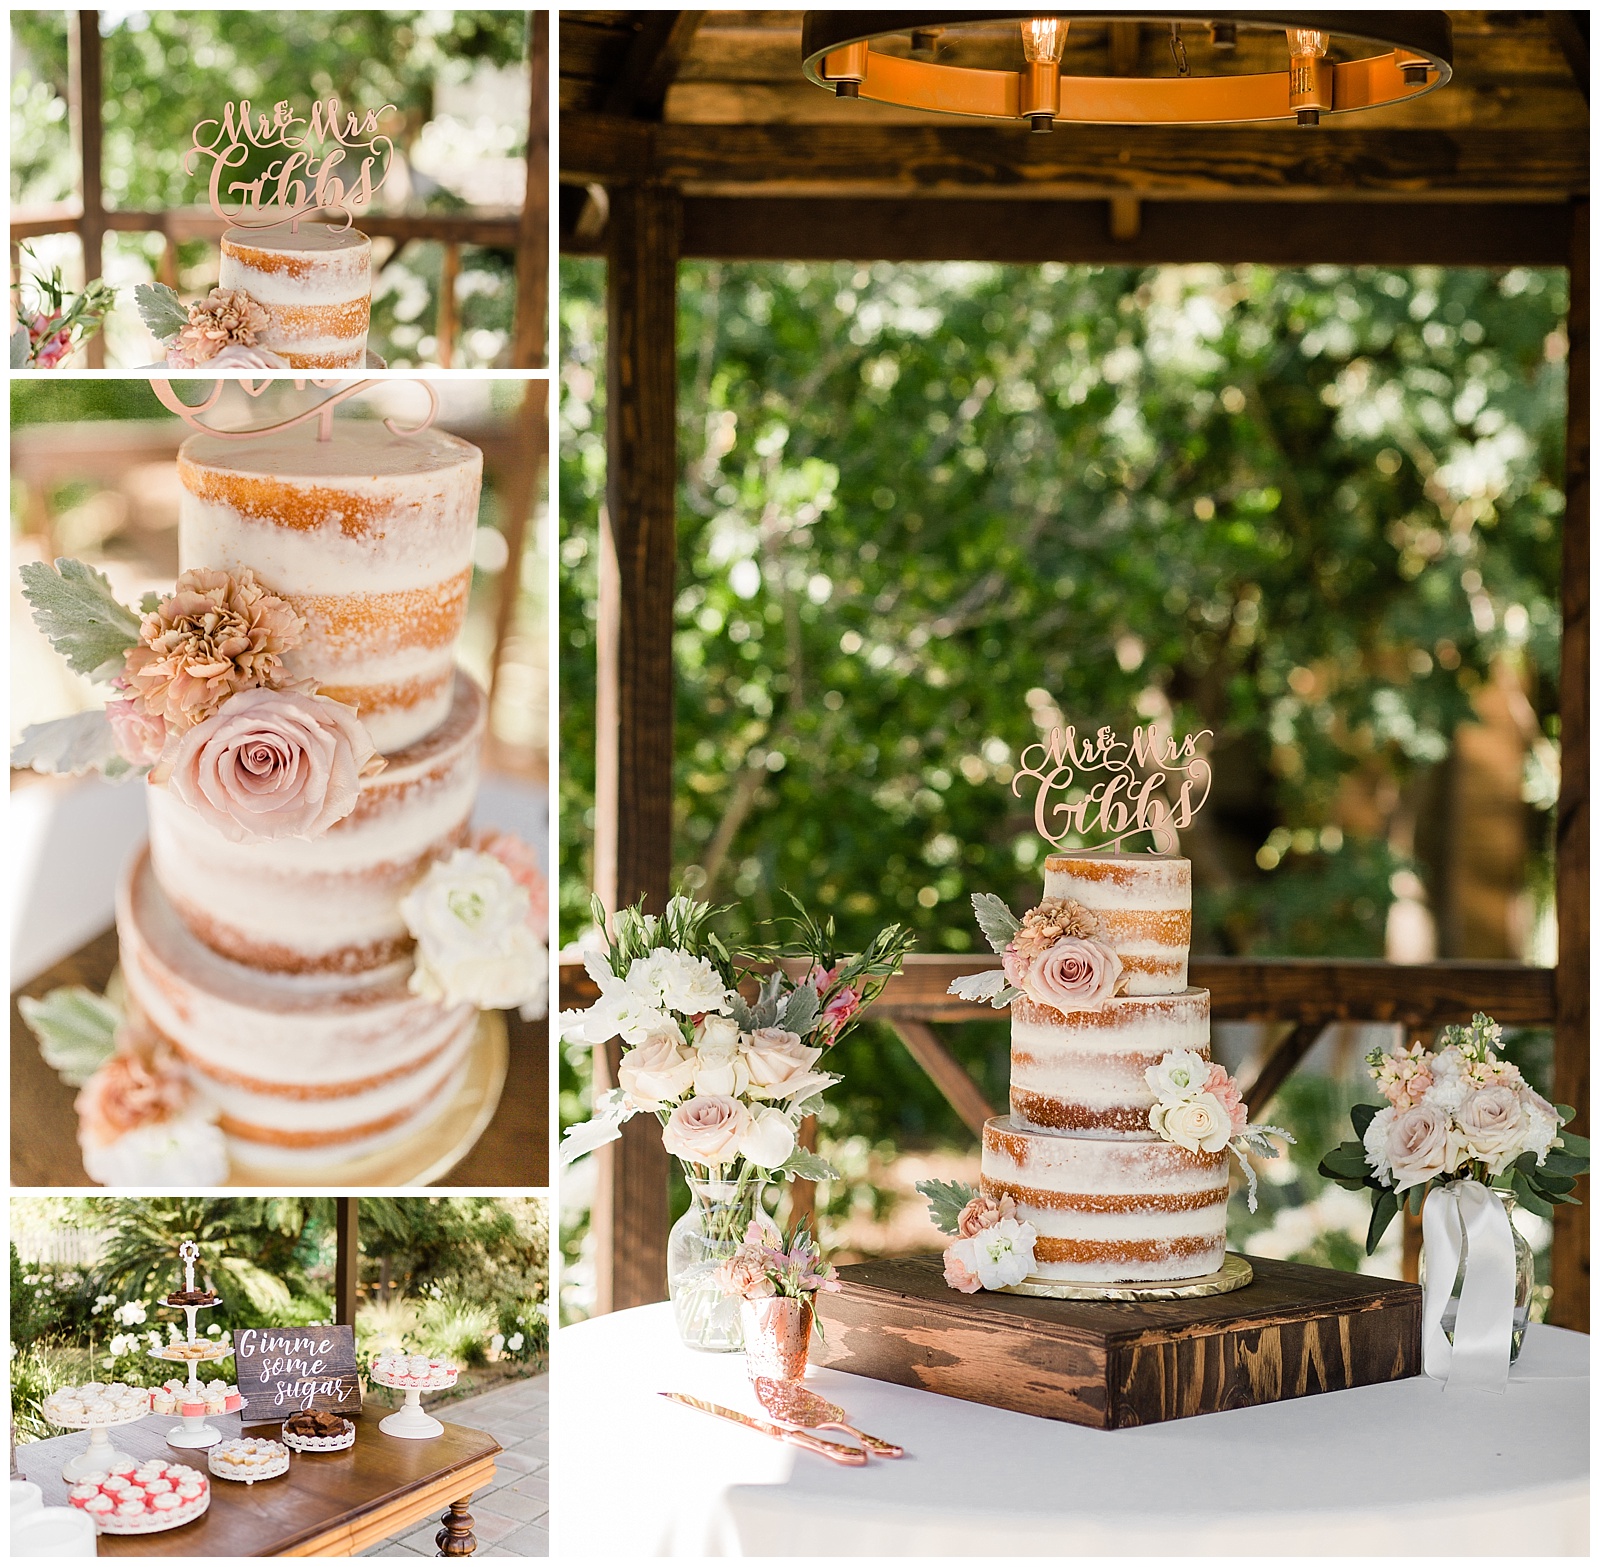 naked wedding cake with a custom wooden cake topper and blush flowers